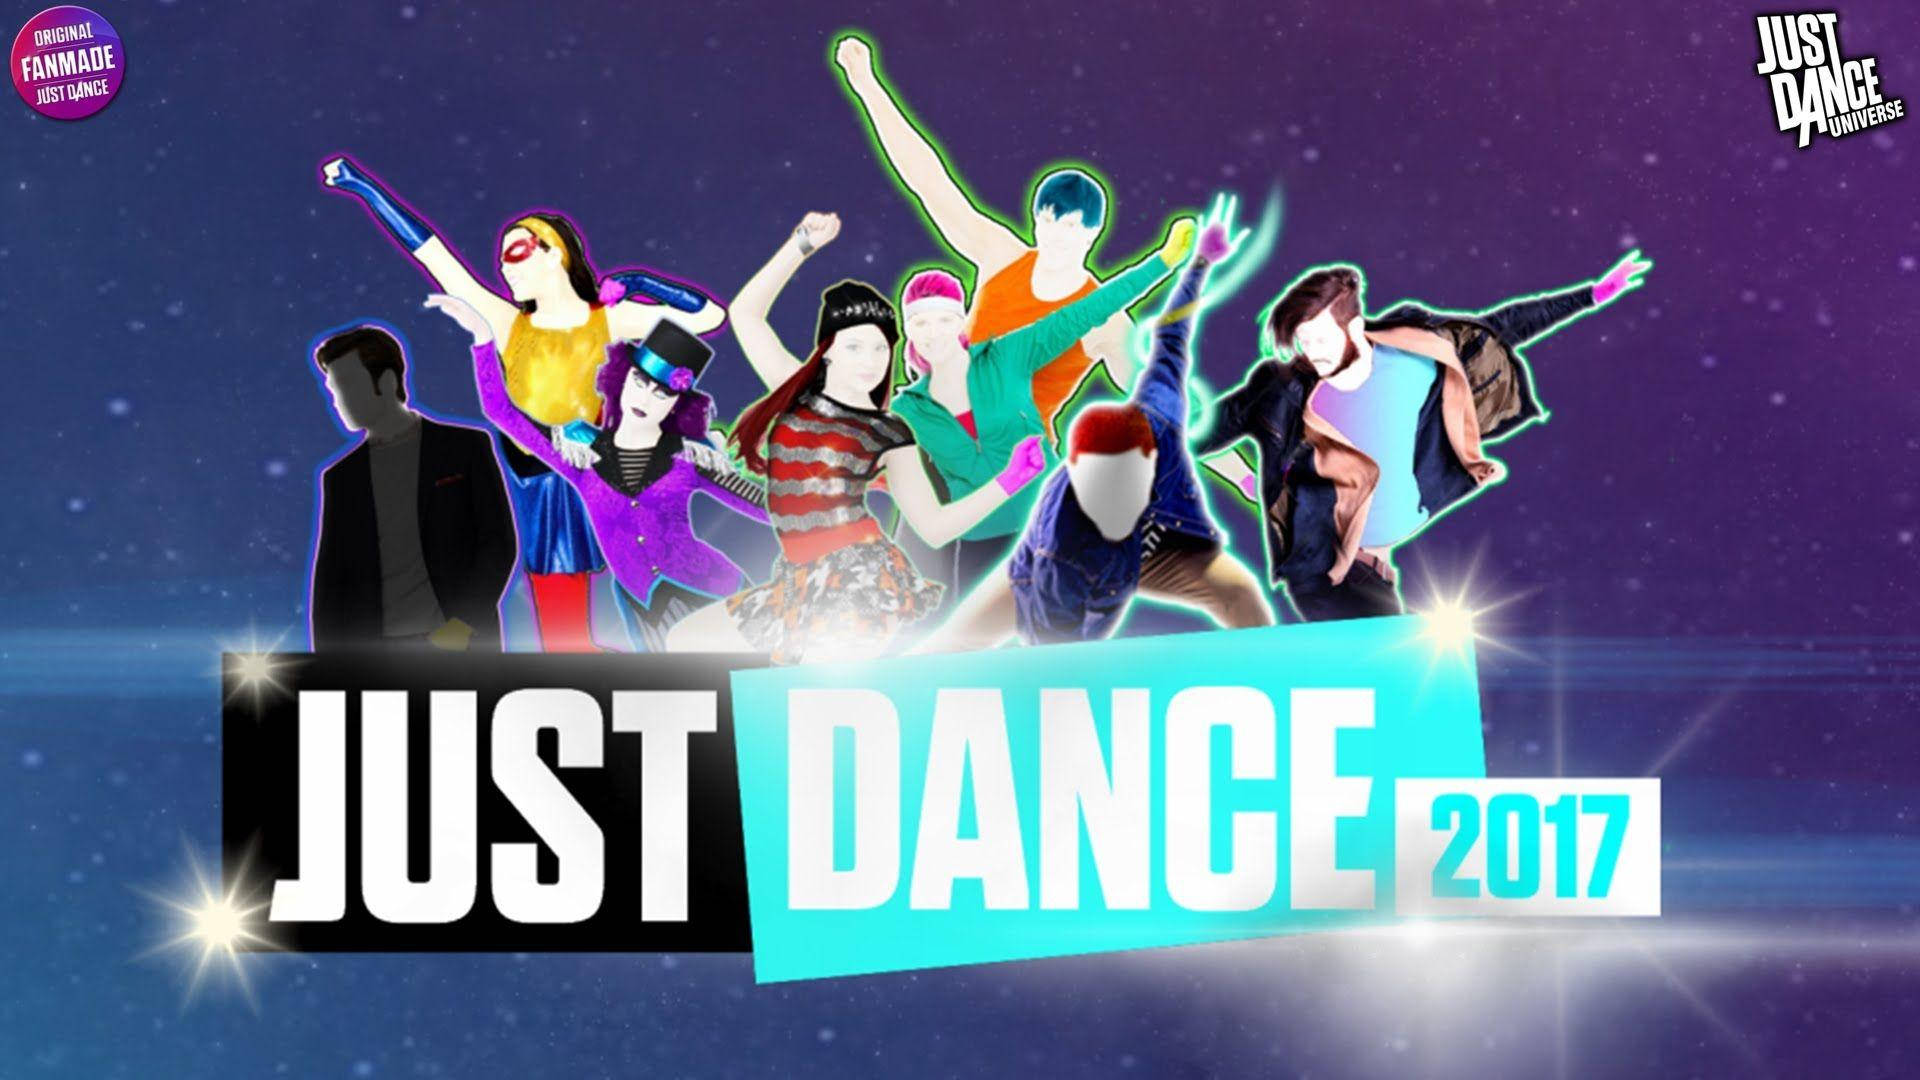 Just Dance 2017 Poster